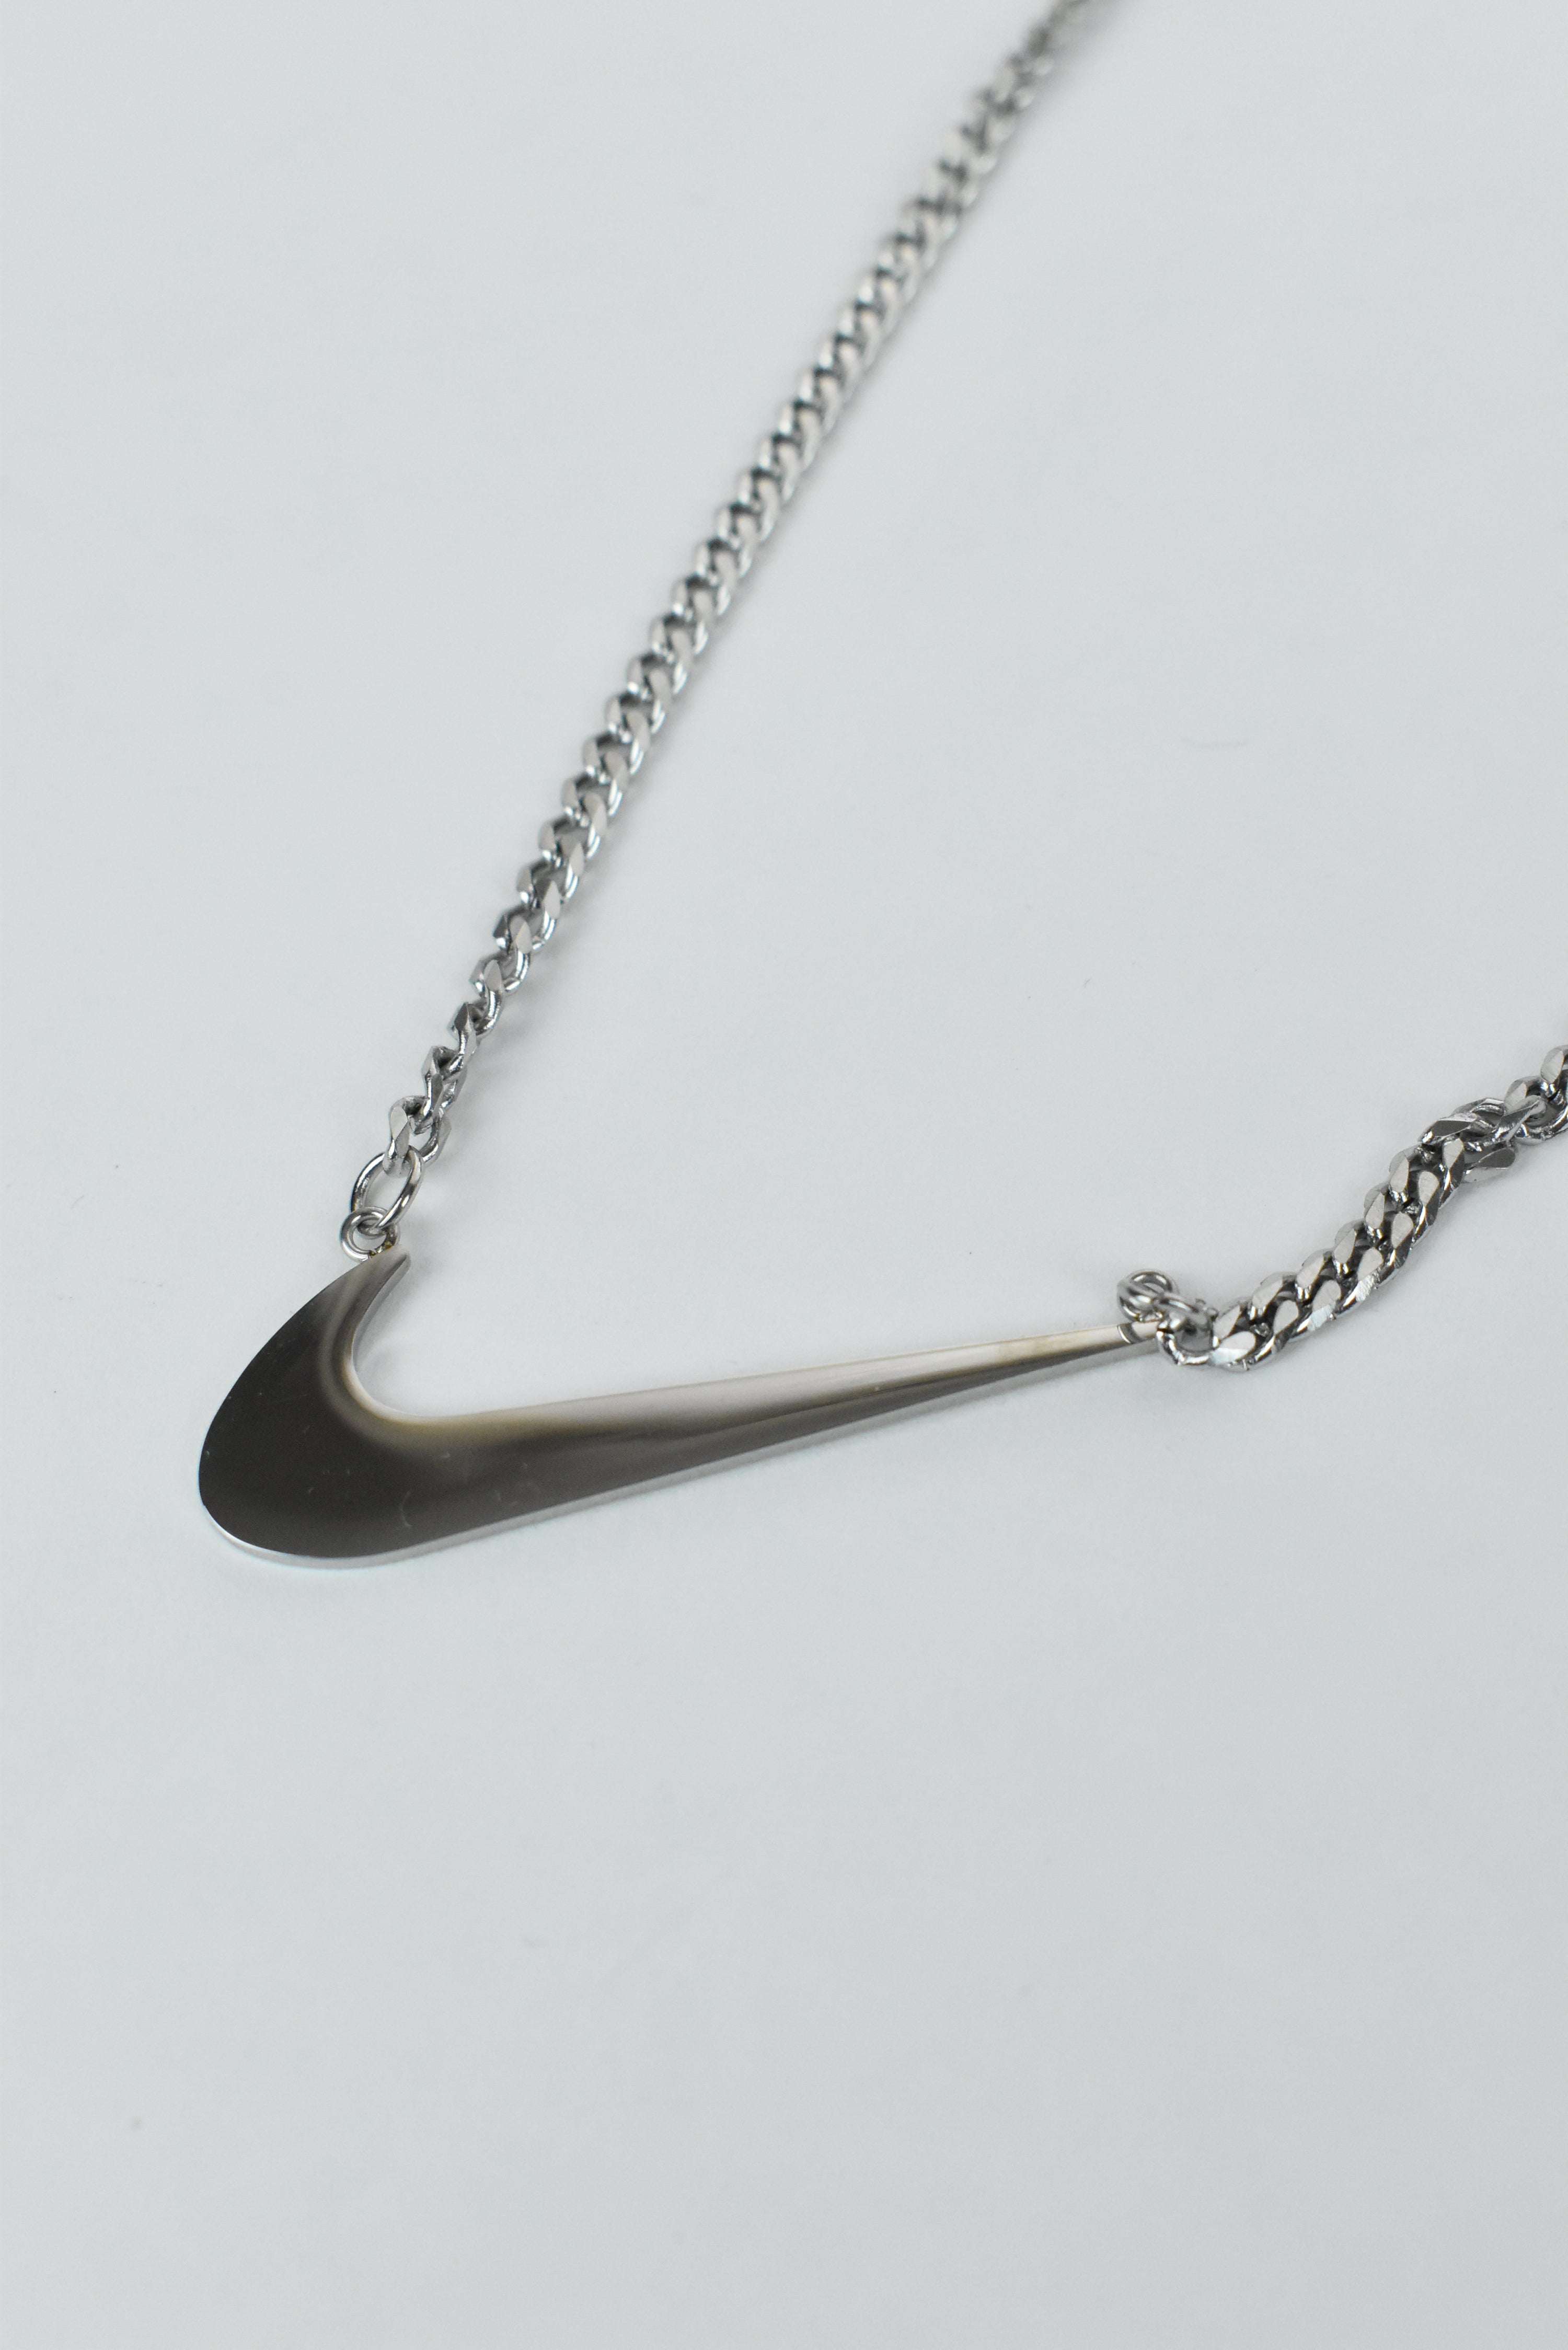 New Nike Swoosh Pendent Necklace Silver Bootleg